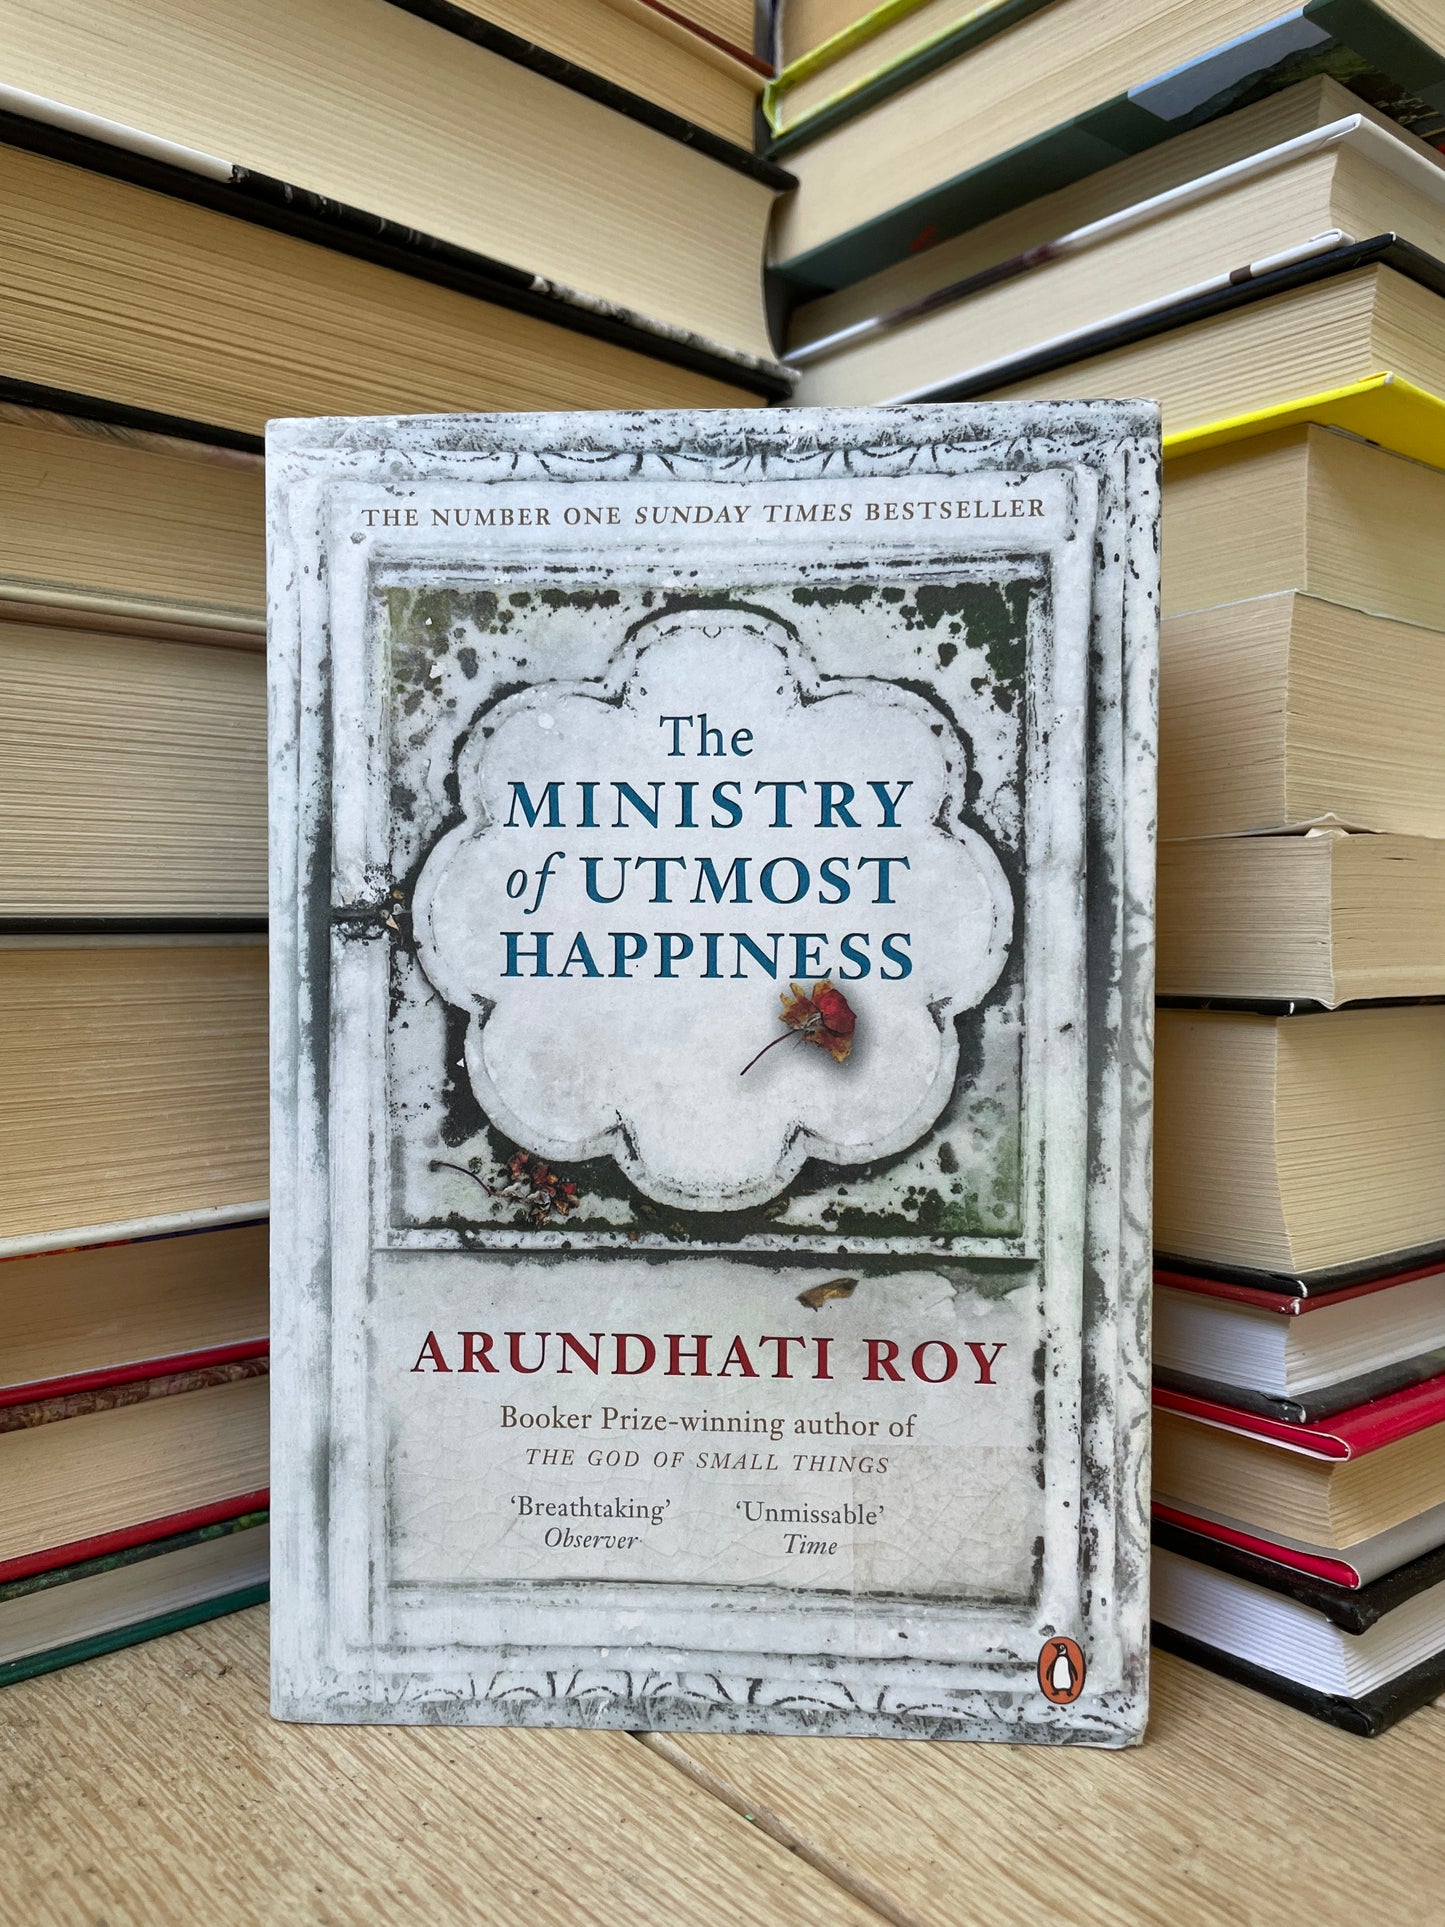 Arundhati Roy - The Ministry of Utmost Happiness